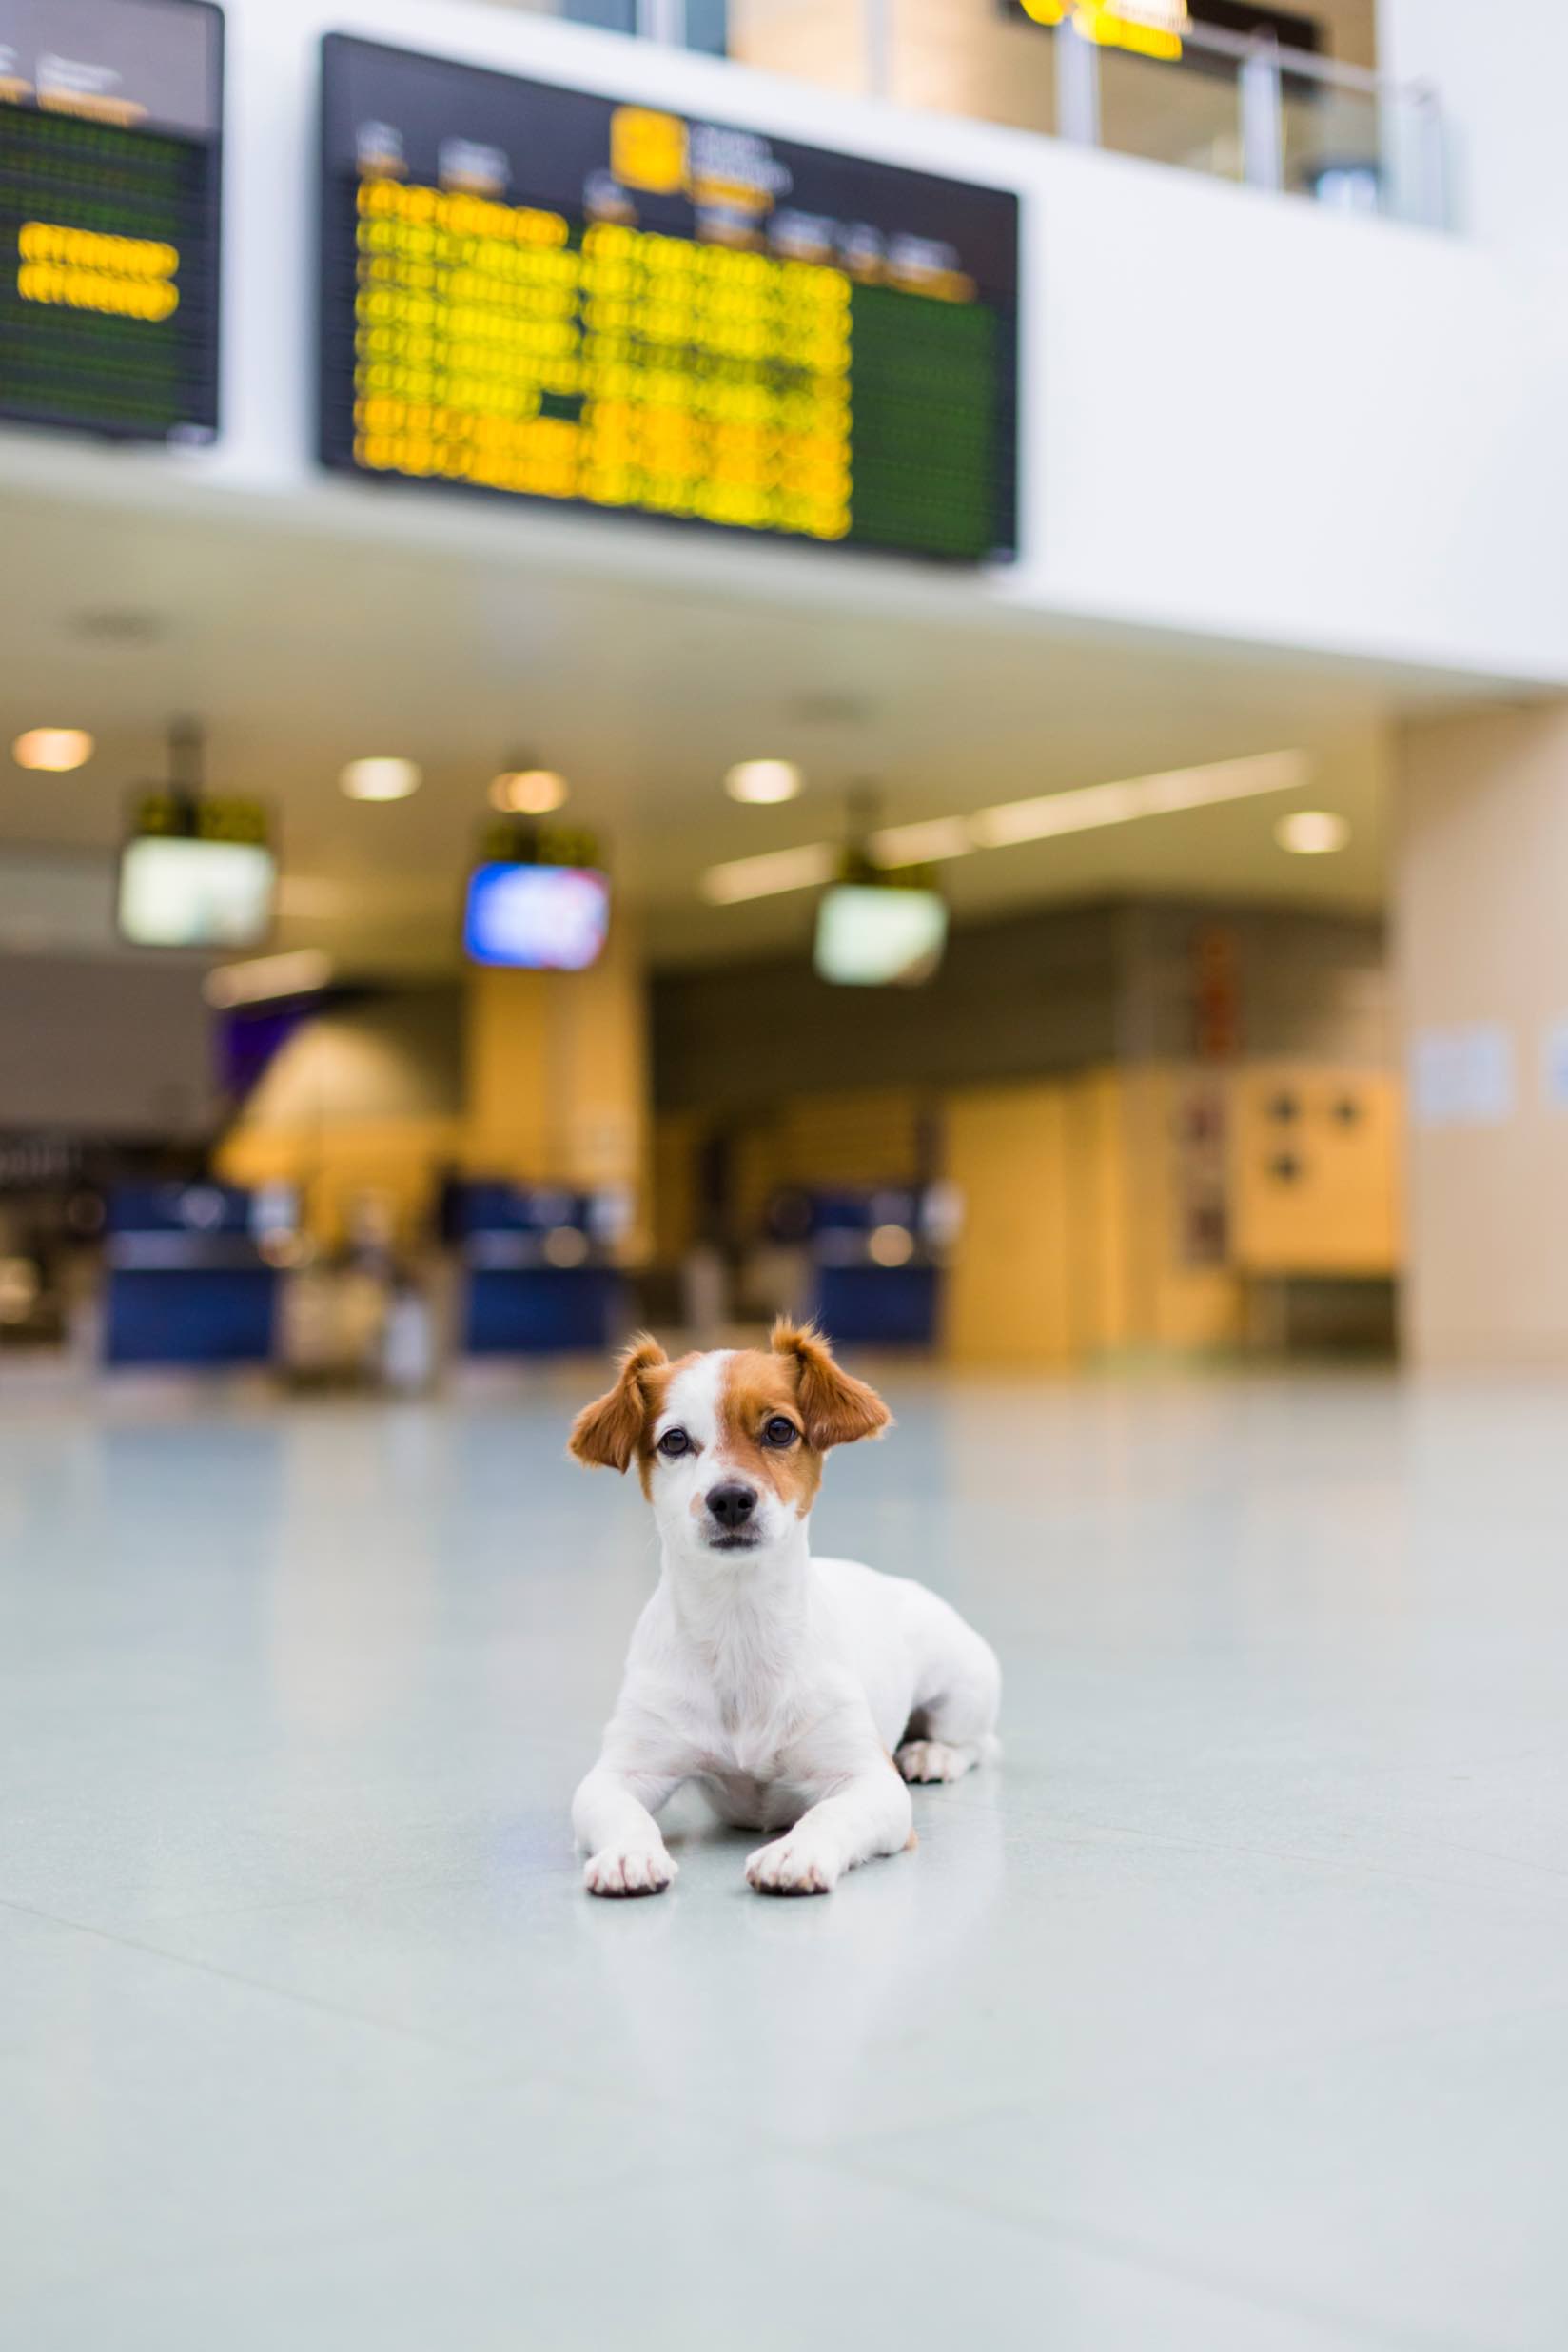 This pup is happy to behave at the airport, especially thanks to training from Dog Training Elite in Atlanta.